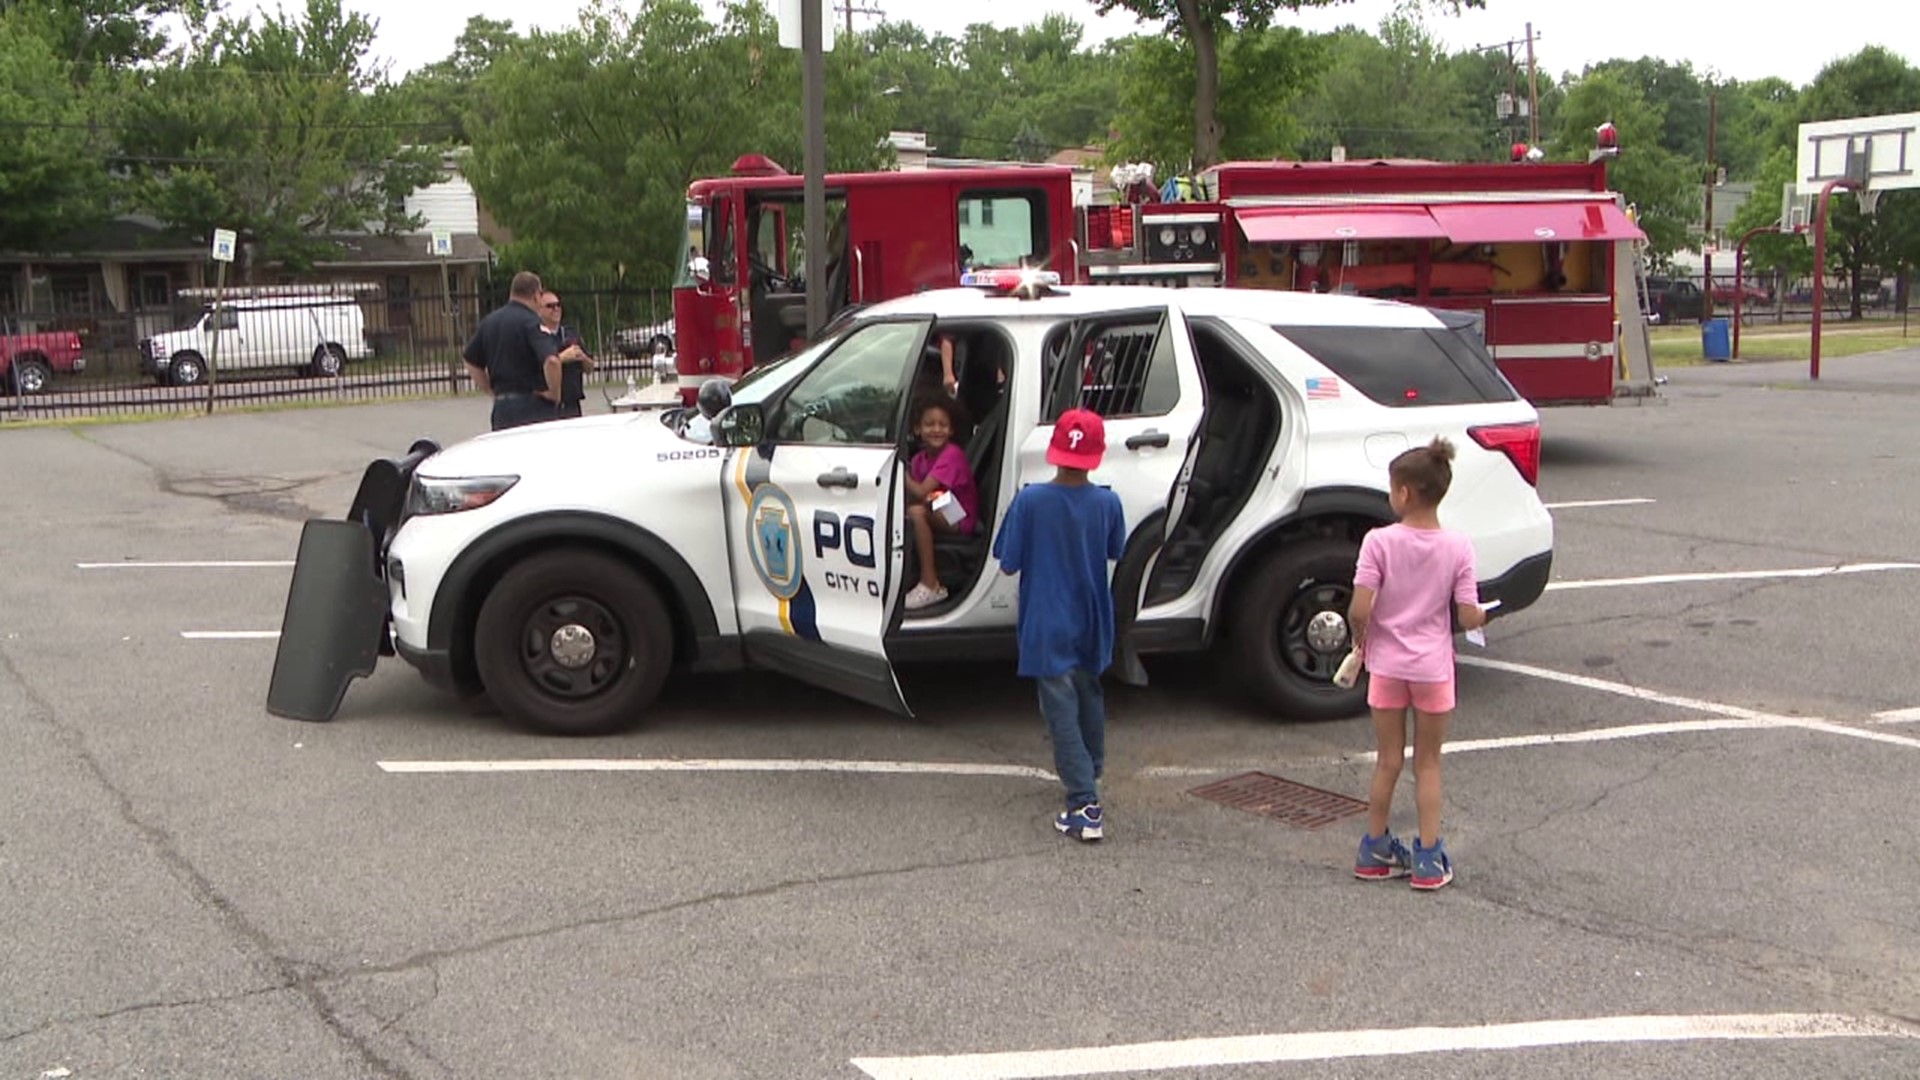 A safety fair in Scranton helped people learn about fire and police safety protocols.